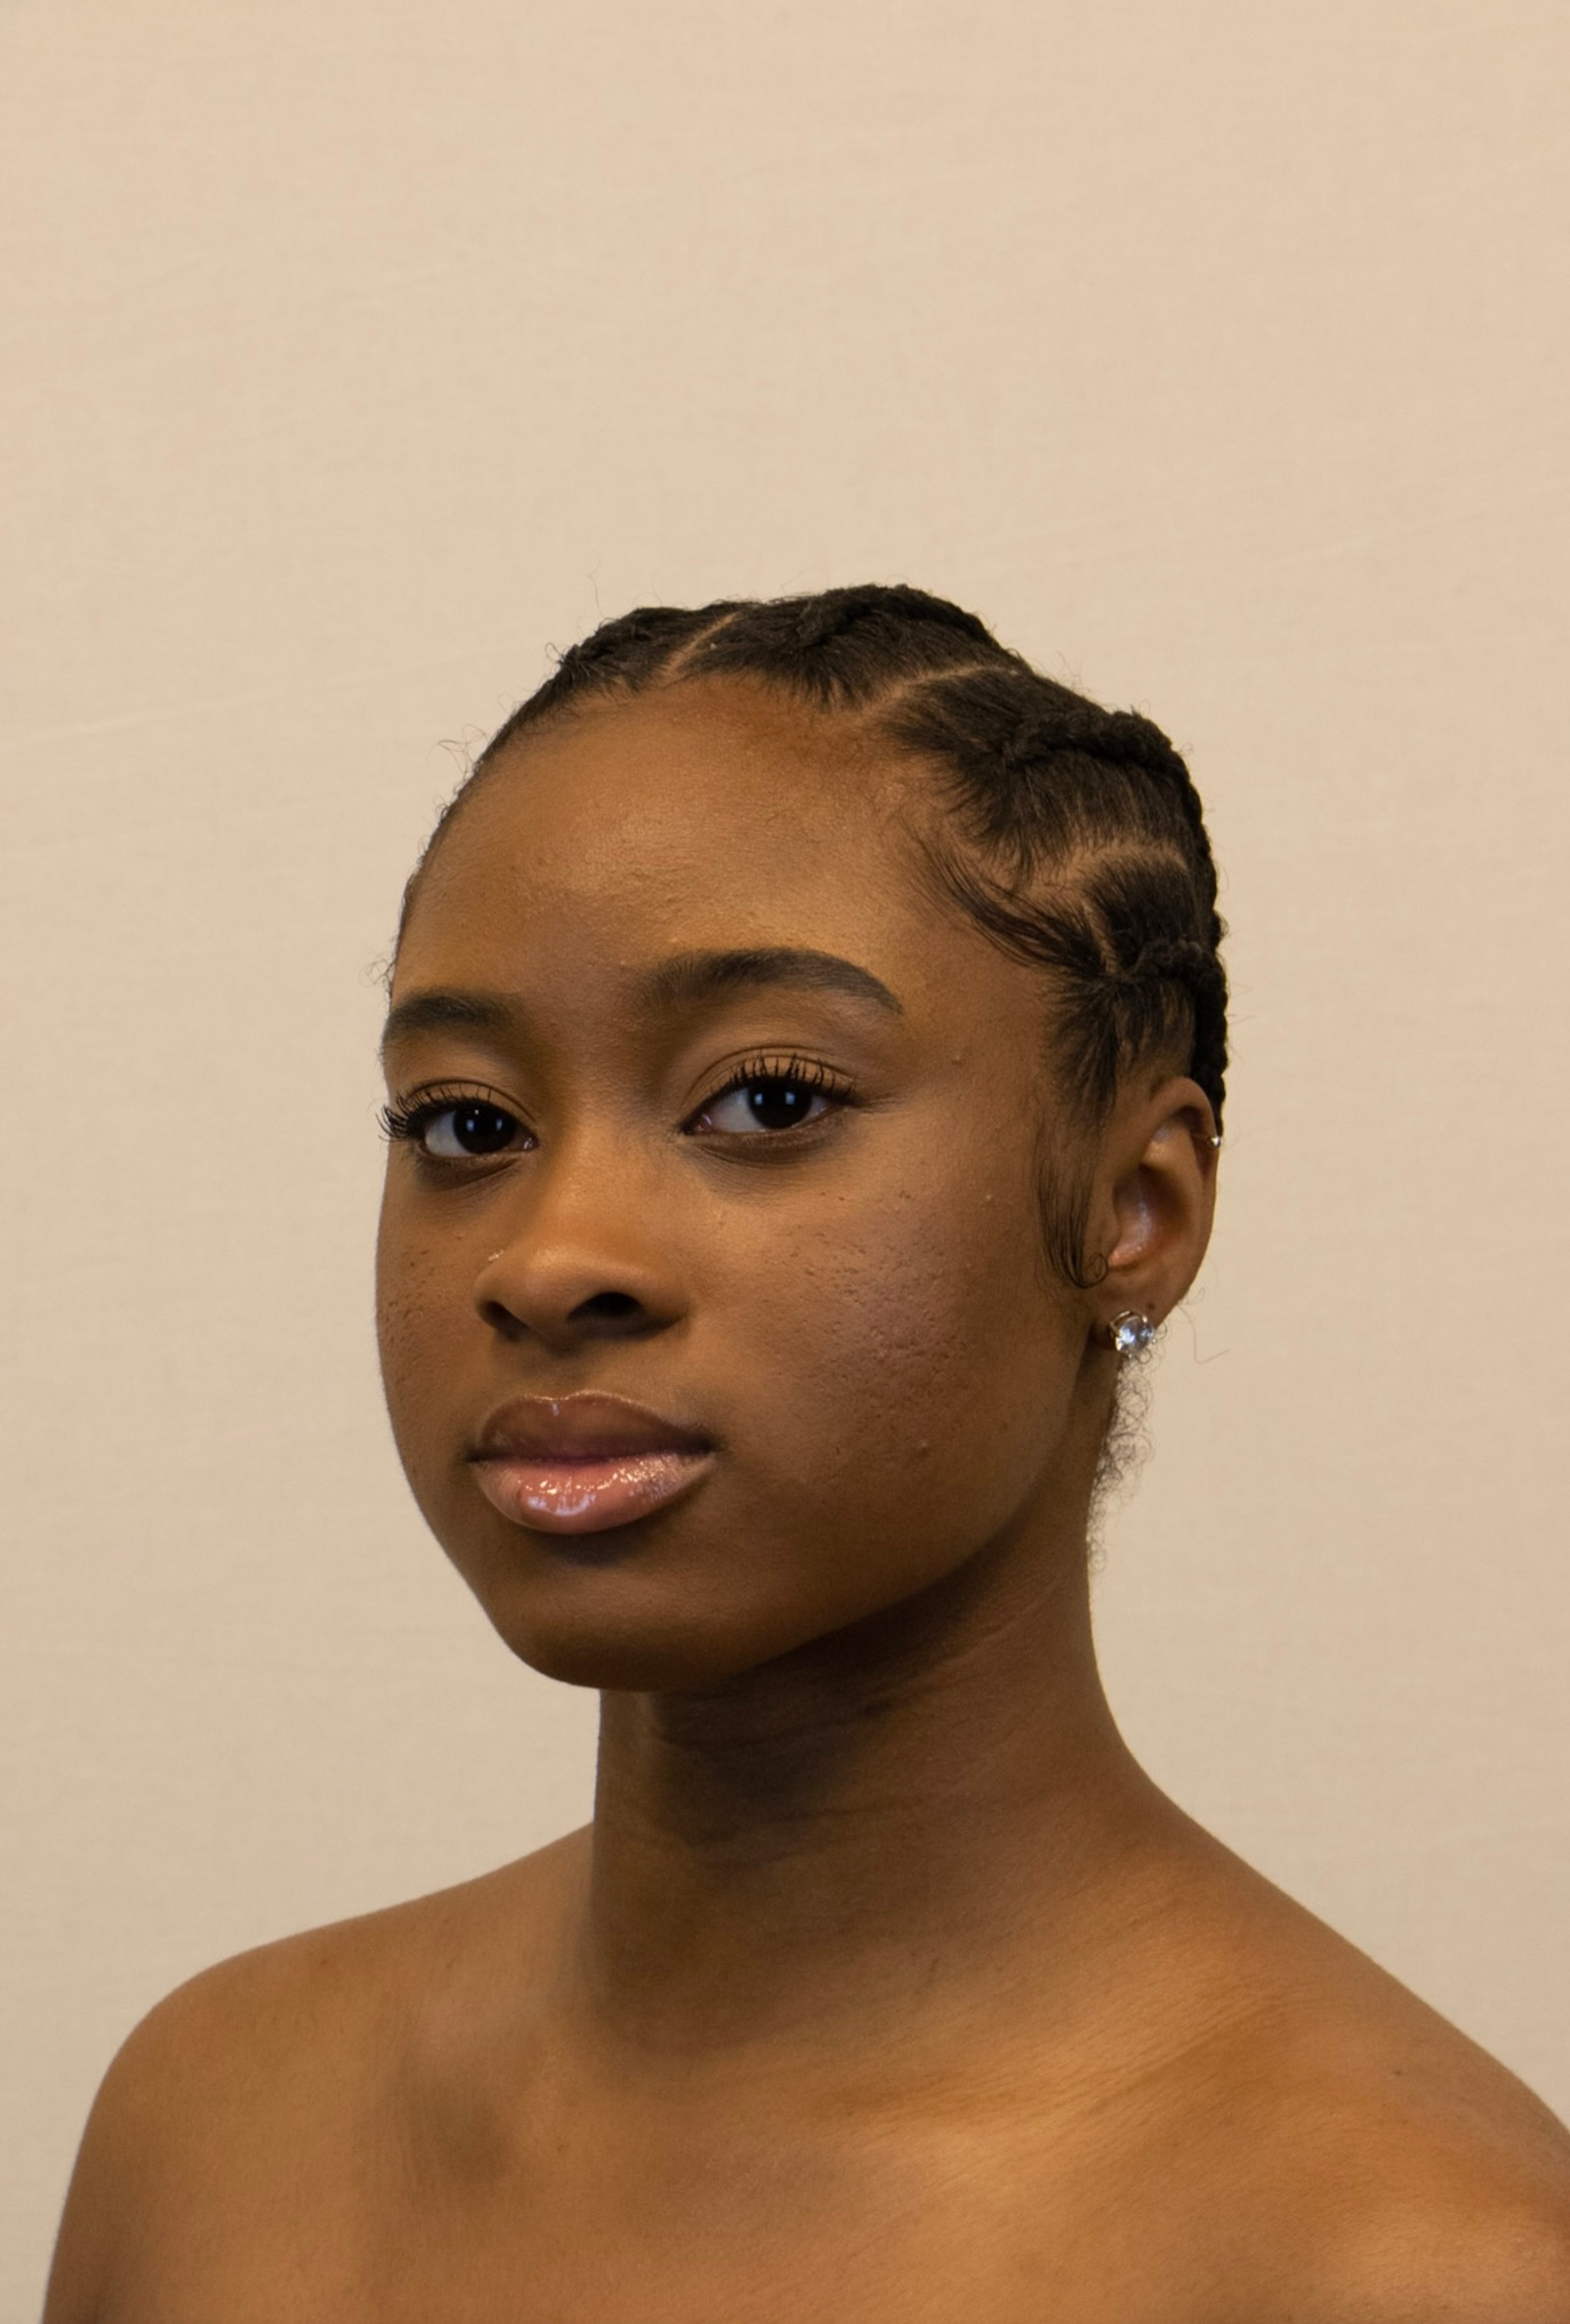 A headshot of dancer Kai Irby, a Black woman who is seen from the shoulders up looking directly at us at a slight angle. She smiles slightly and had her hair braided in rows. 